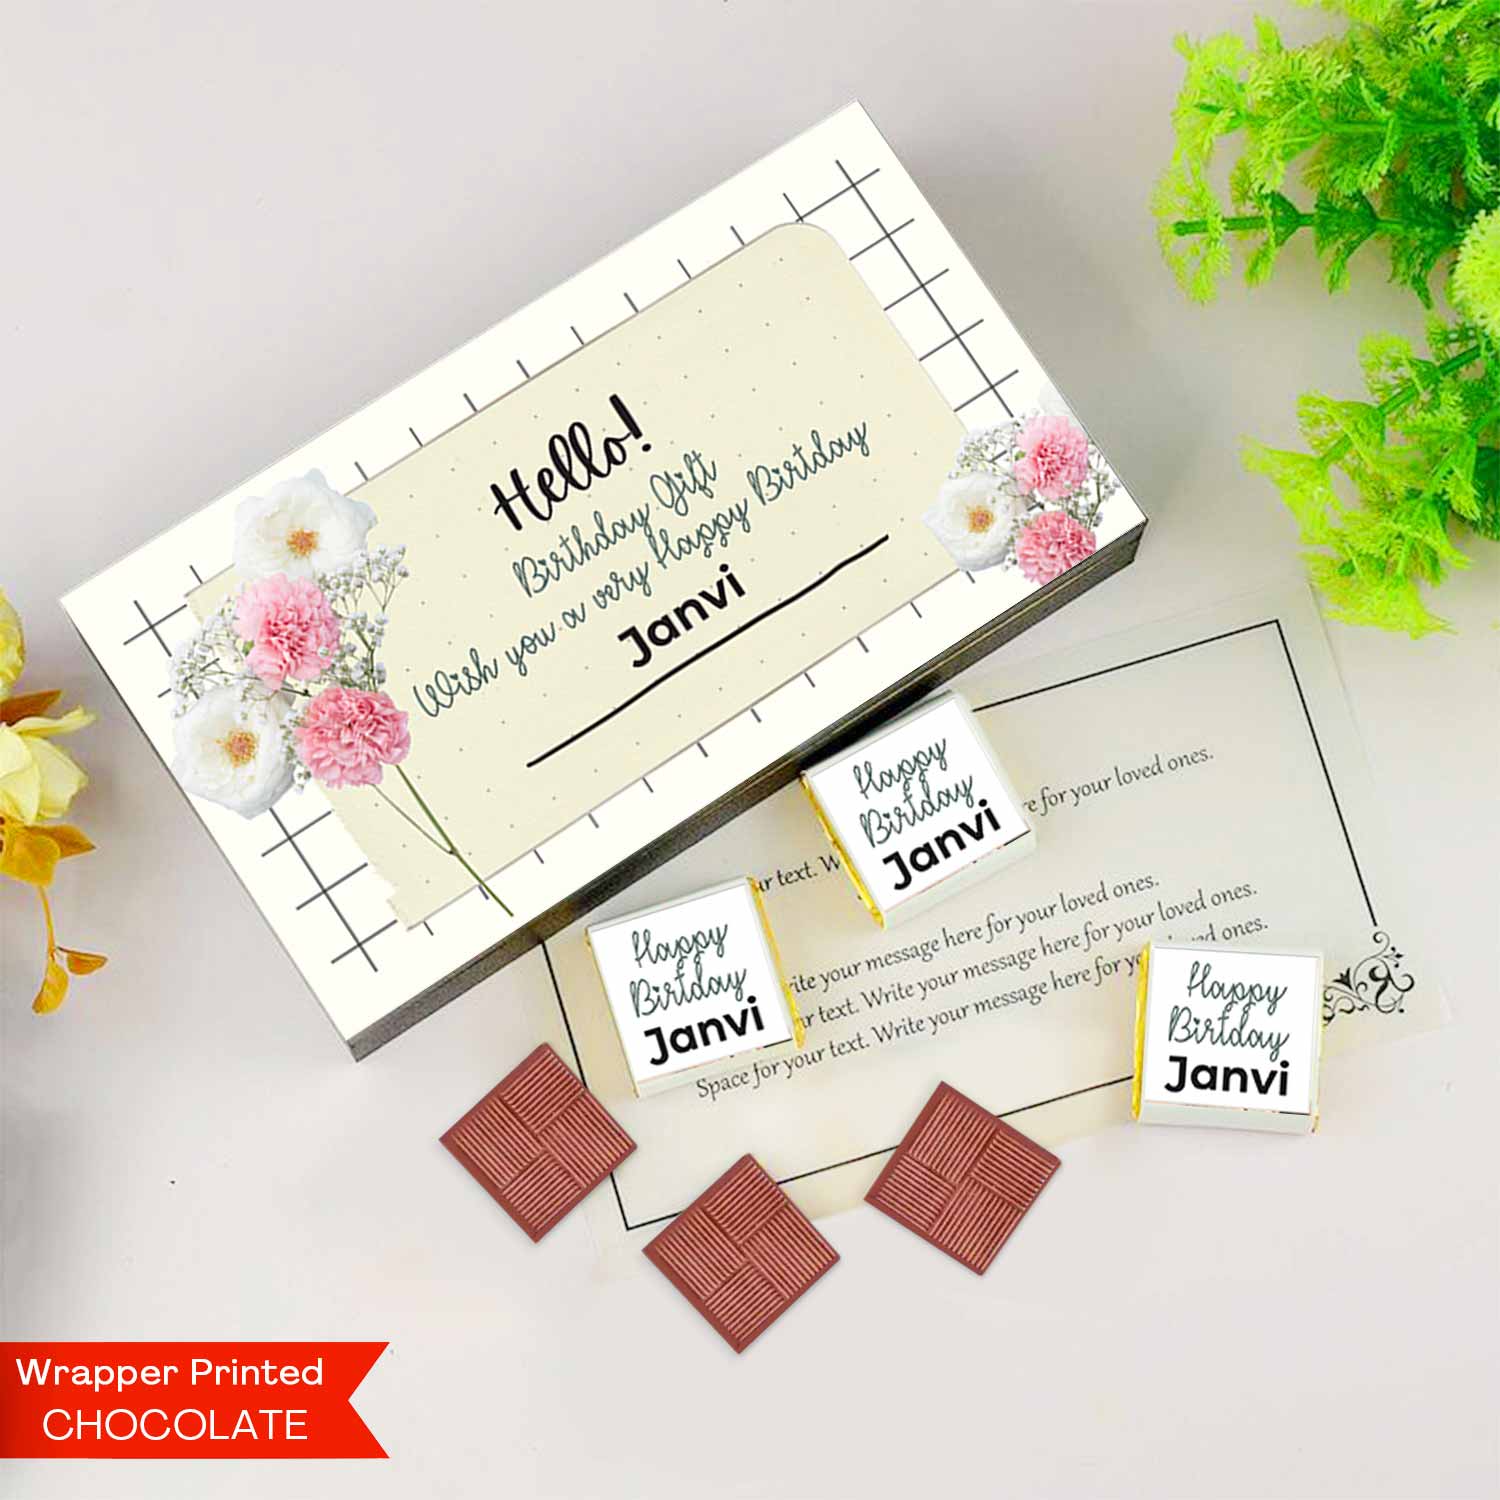  personalised chocolates with names personalised chocolates for birthdays customised chocolate gifts personalised chocolates with photo india customised chocolate box customised chocolates near me customized chocolate box near me customised chocolate wrapper